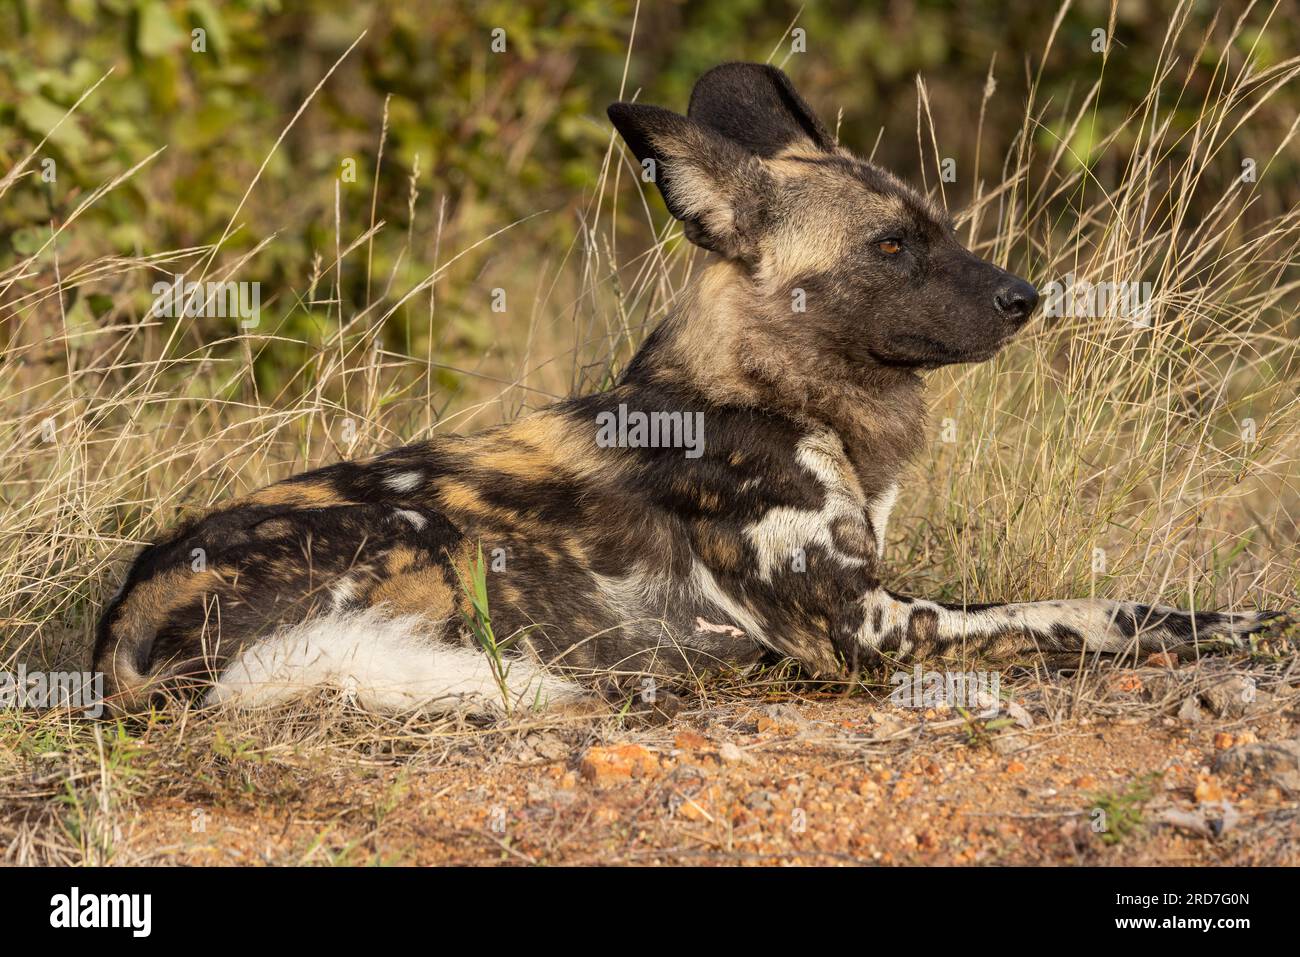 A single African wild dog resting near the Phalaborwa gate in the Kruger National Park, South Africa Stock Photo